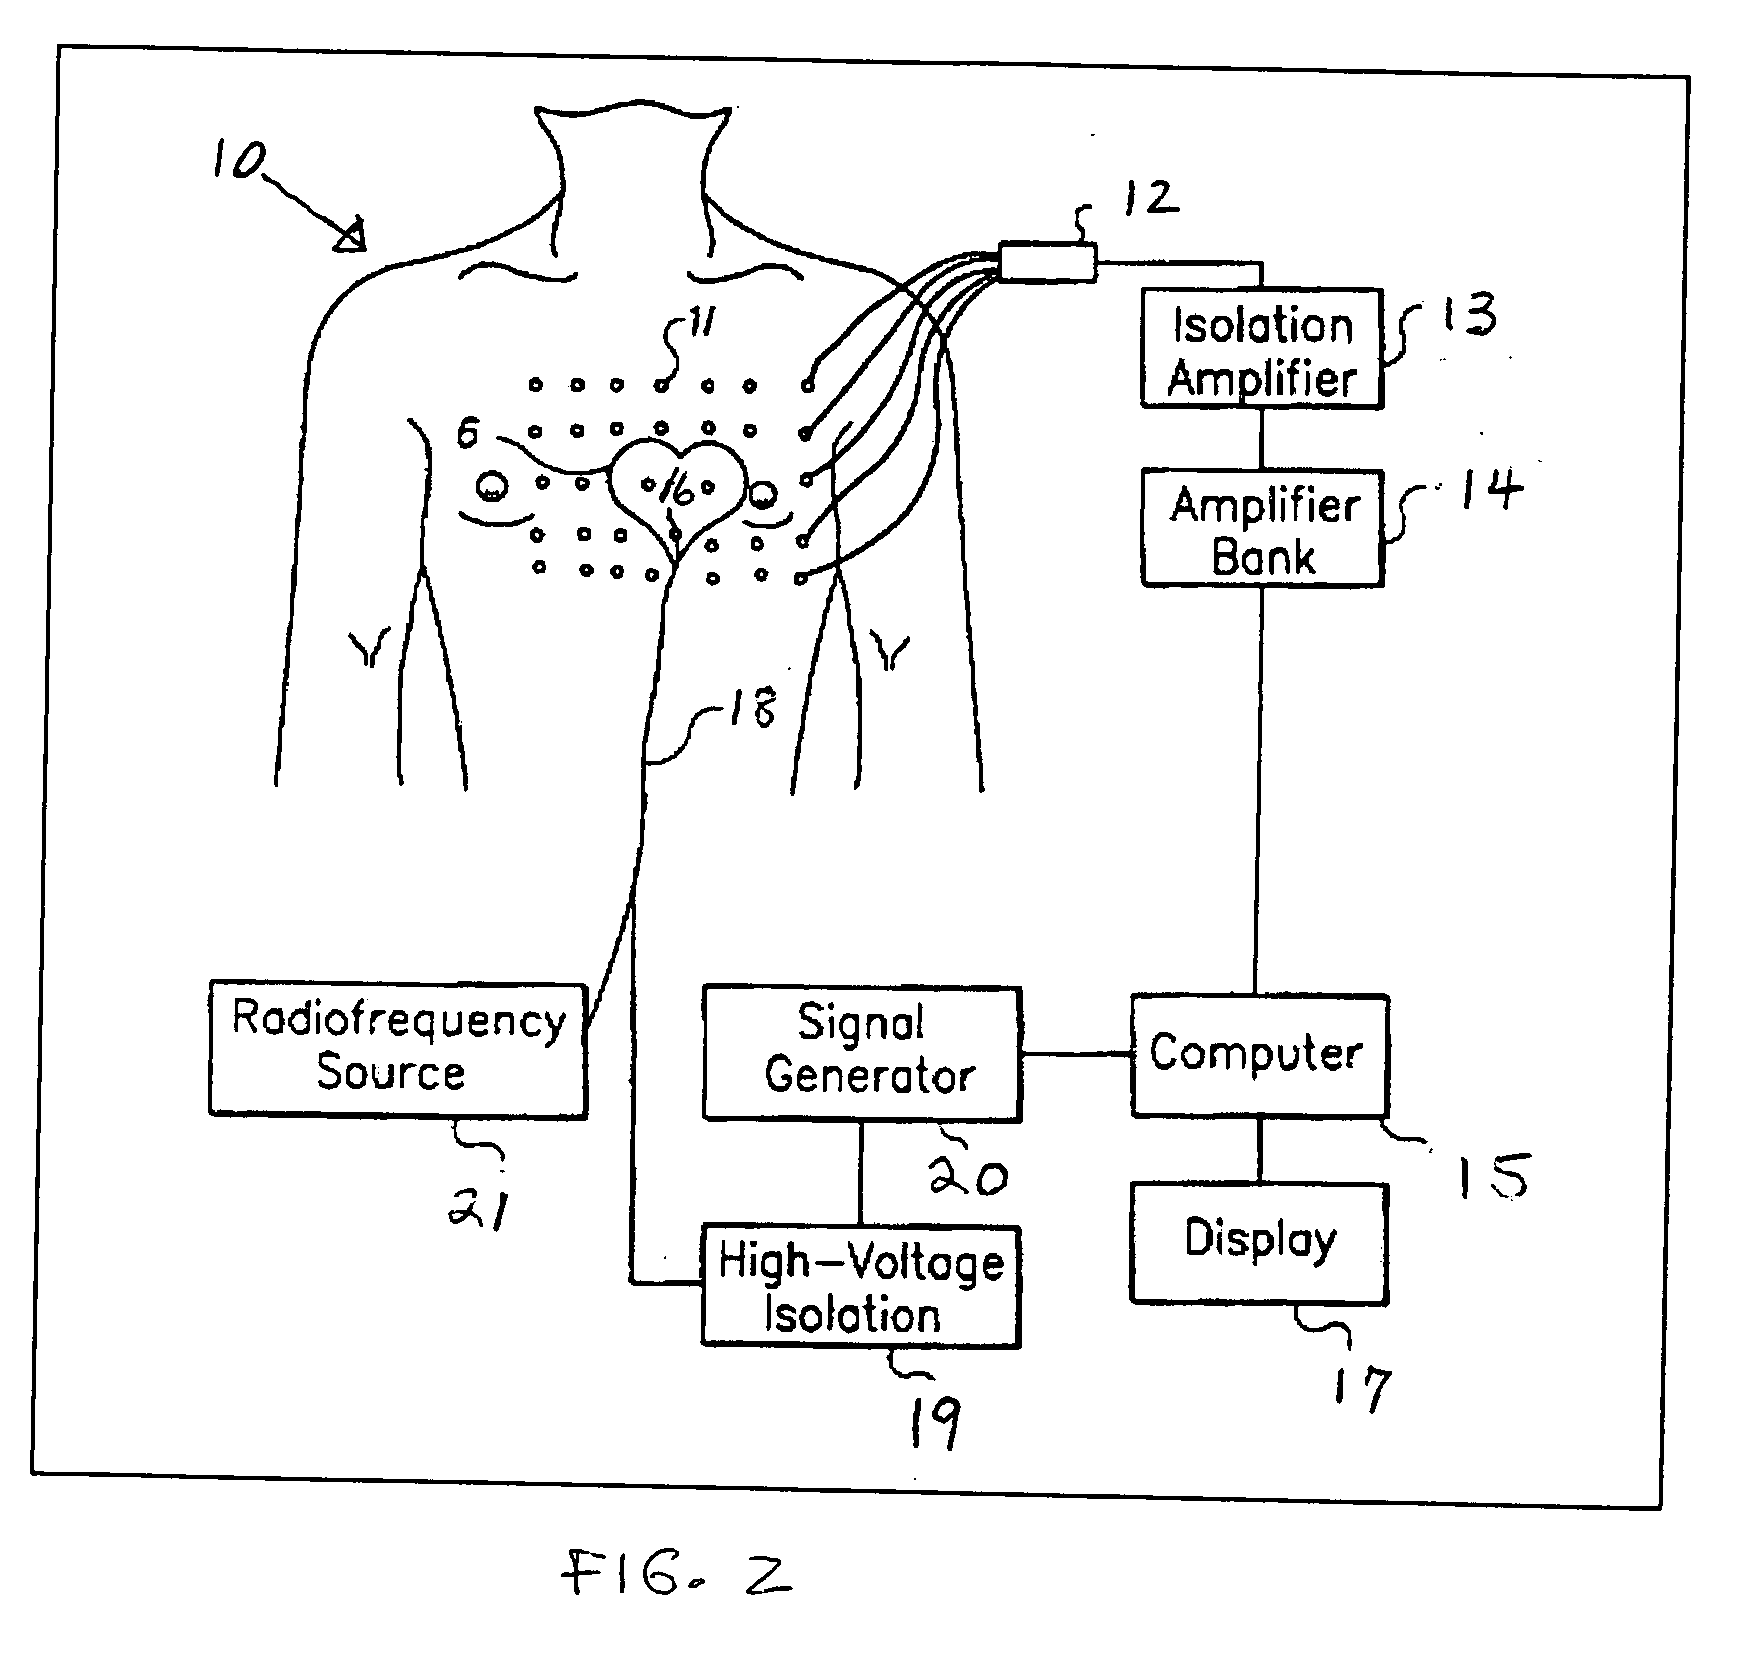 Method and apparatus for the guided ablative therapy of fast ventricular arrhythmia